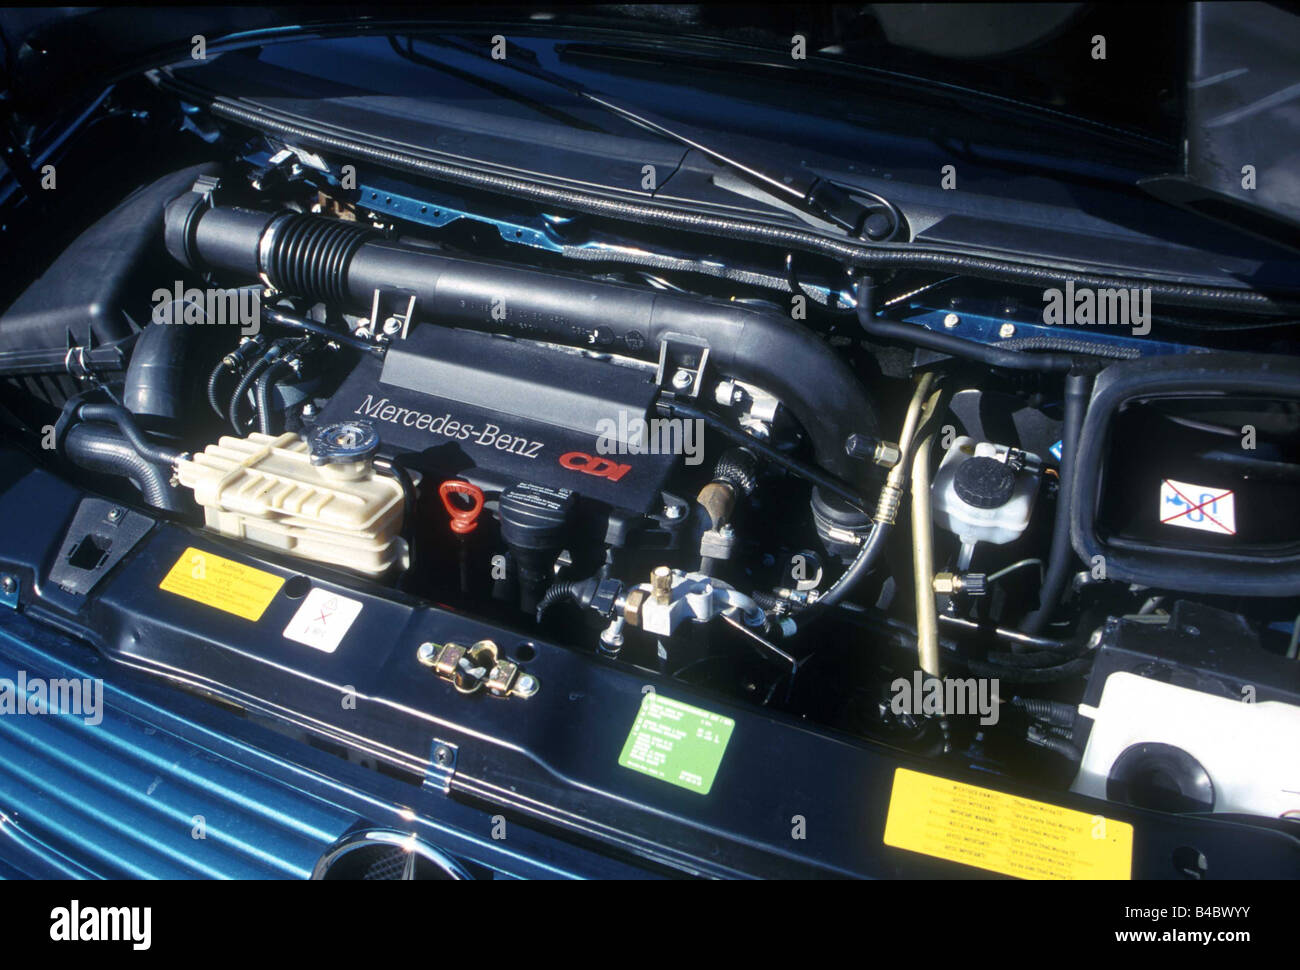 Car, Mercedes V 220 CDI, Van, blue, model year 1999-, view in engine compartment, engine, technique/accessory, accessories Stock Photo